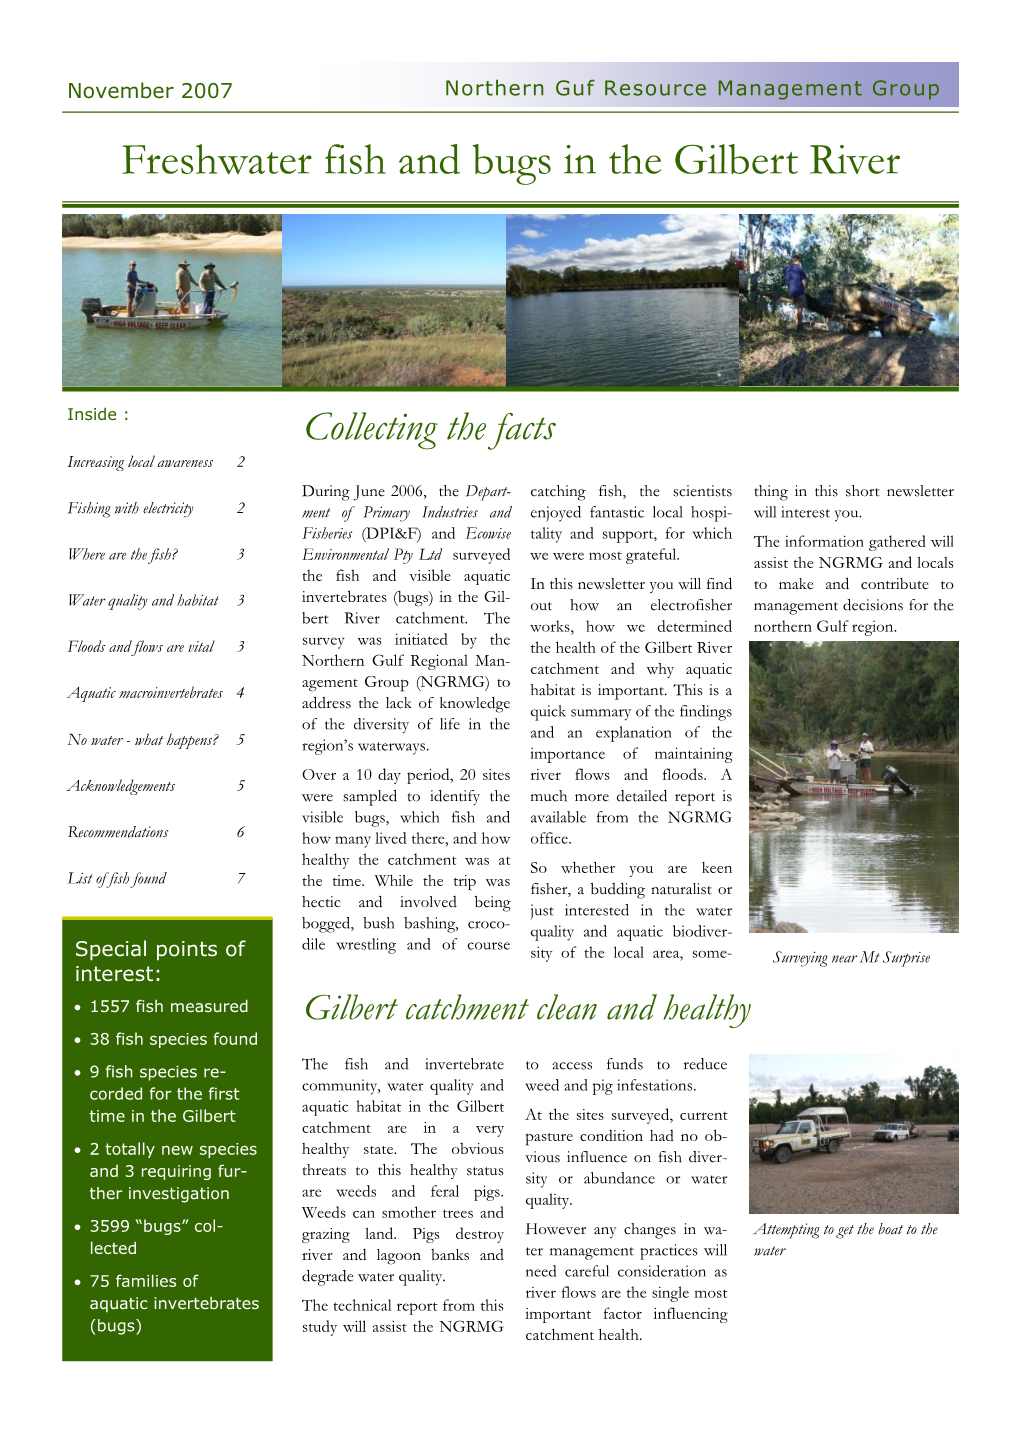 Freshwater Fish and Bugs in the Gilbert River